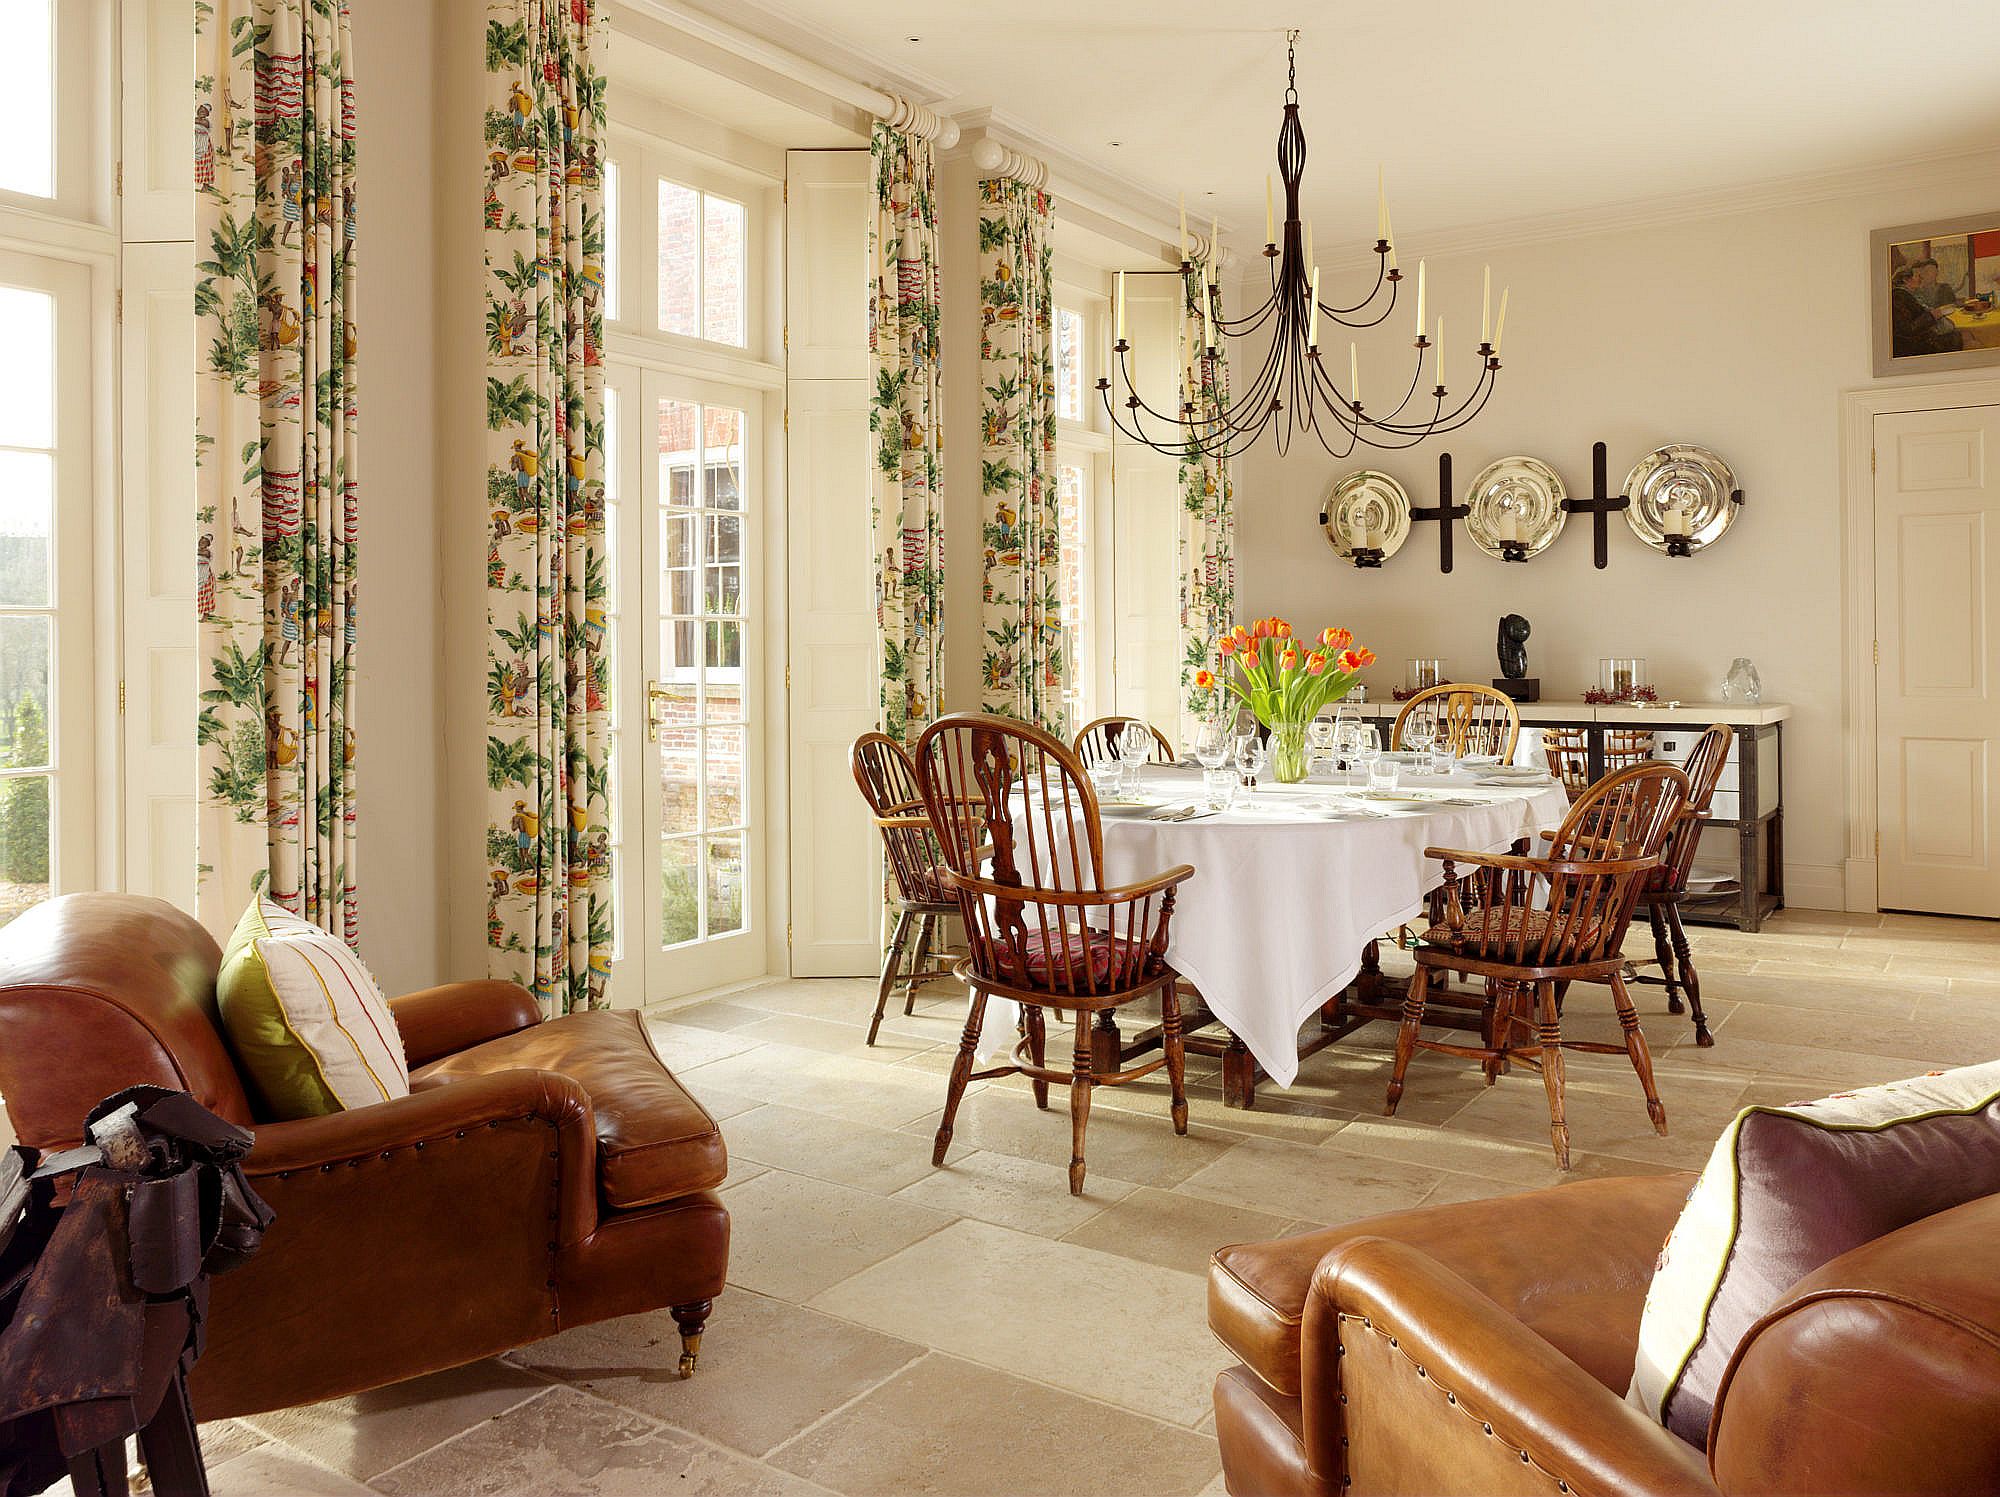 Classic English charm combined with modernity inside the Manor House